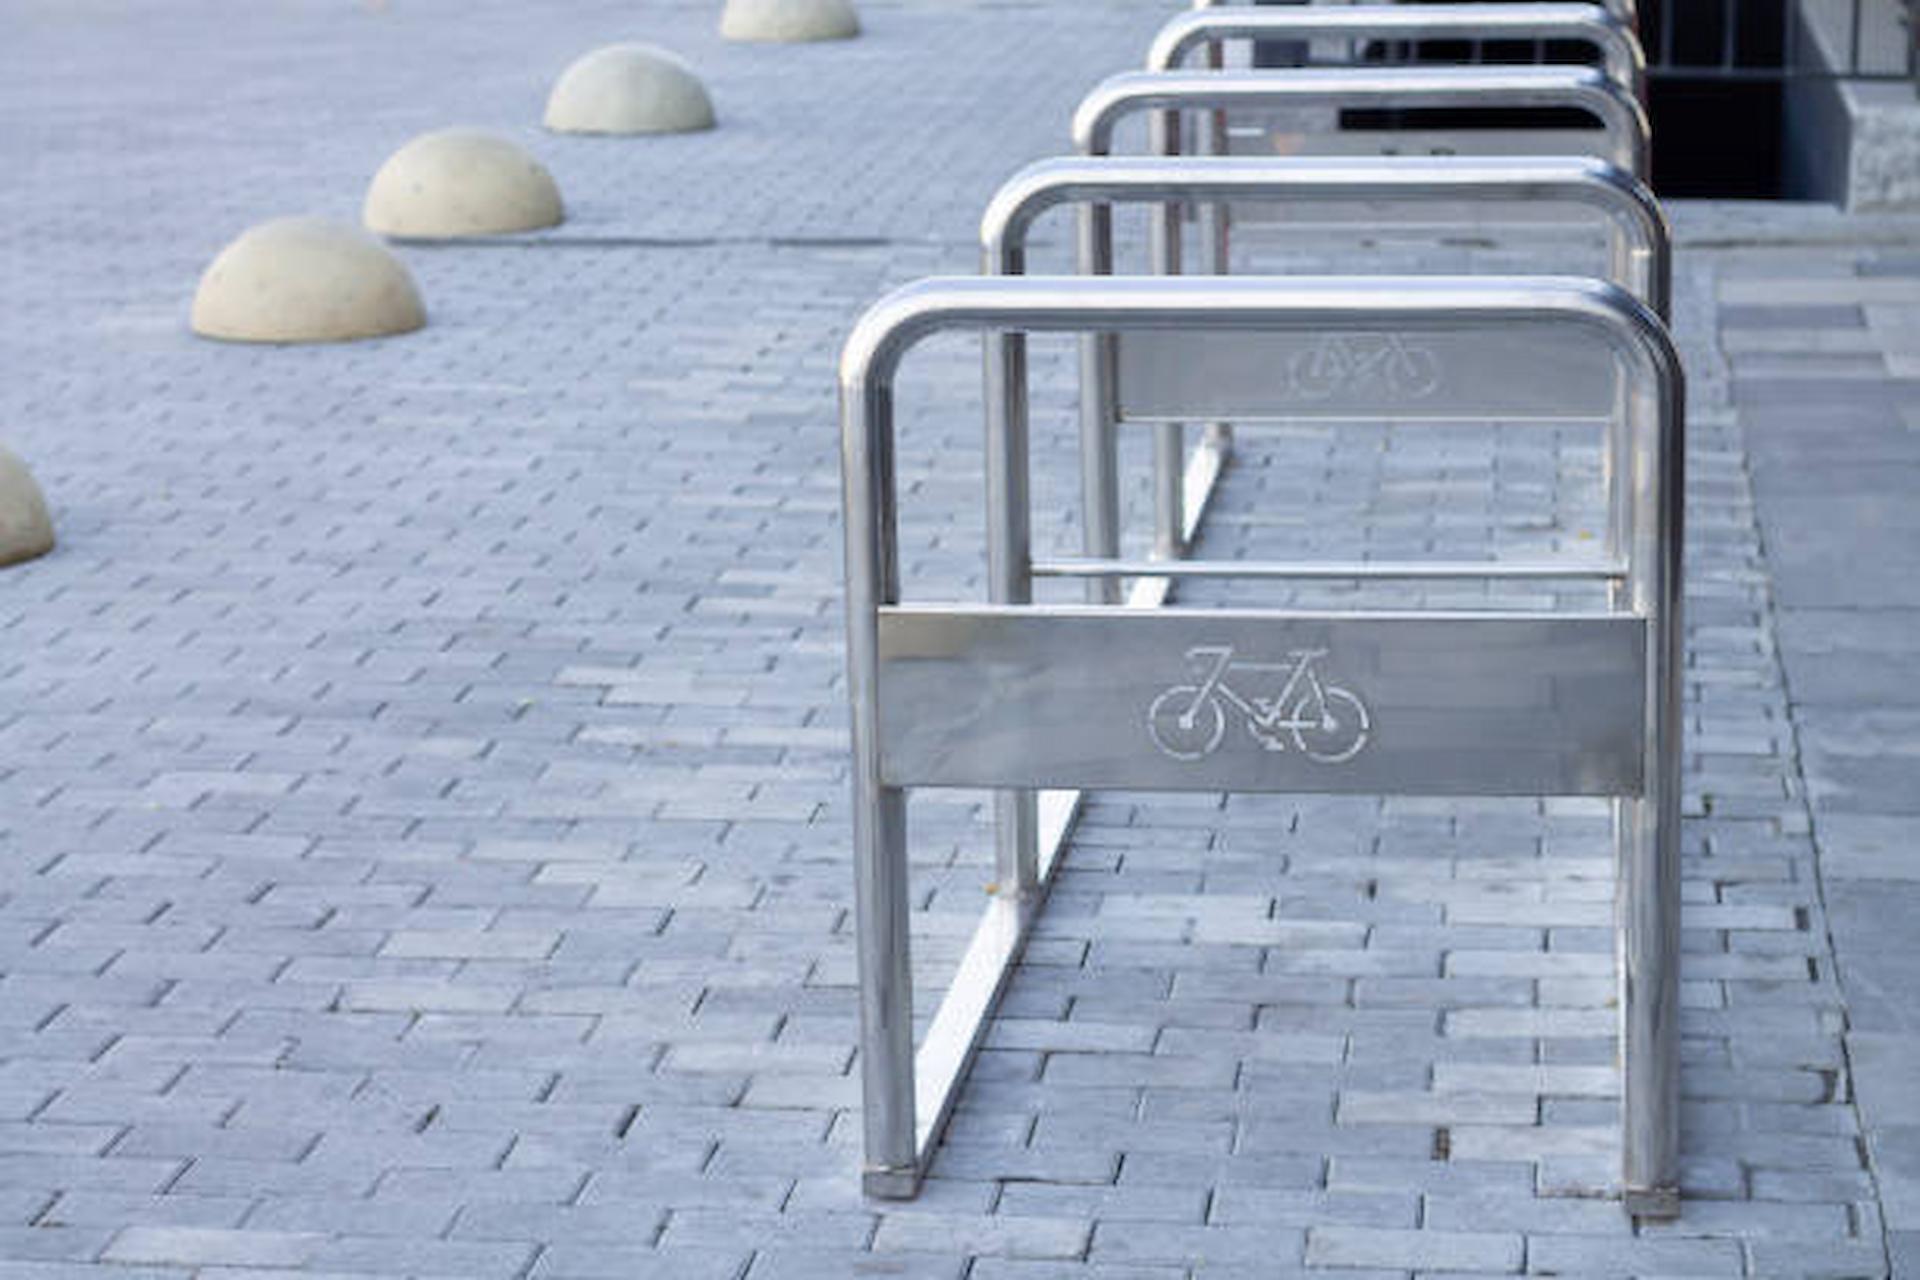 Smart Technology Used In Todays Cycle Stands